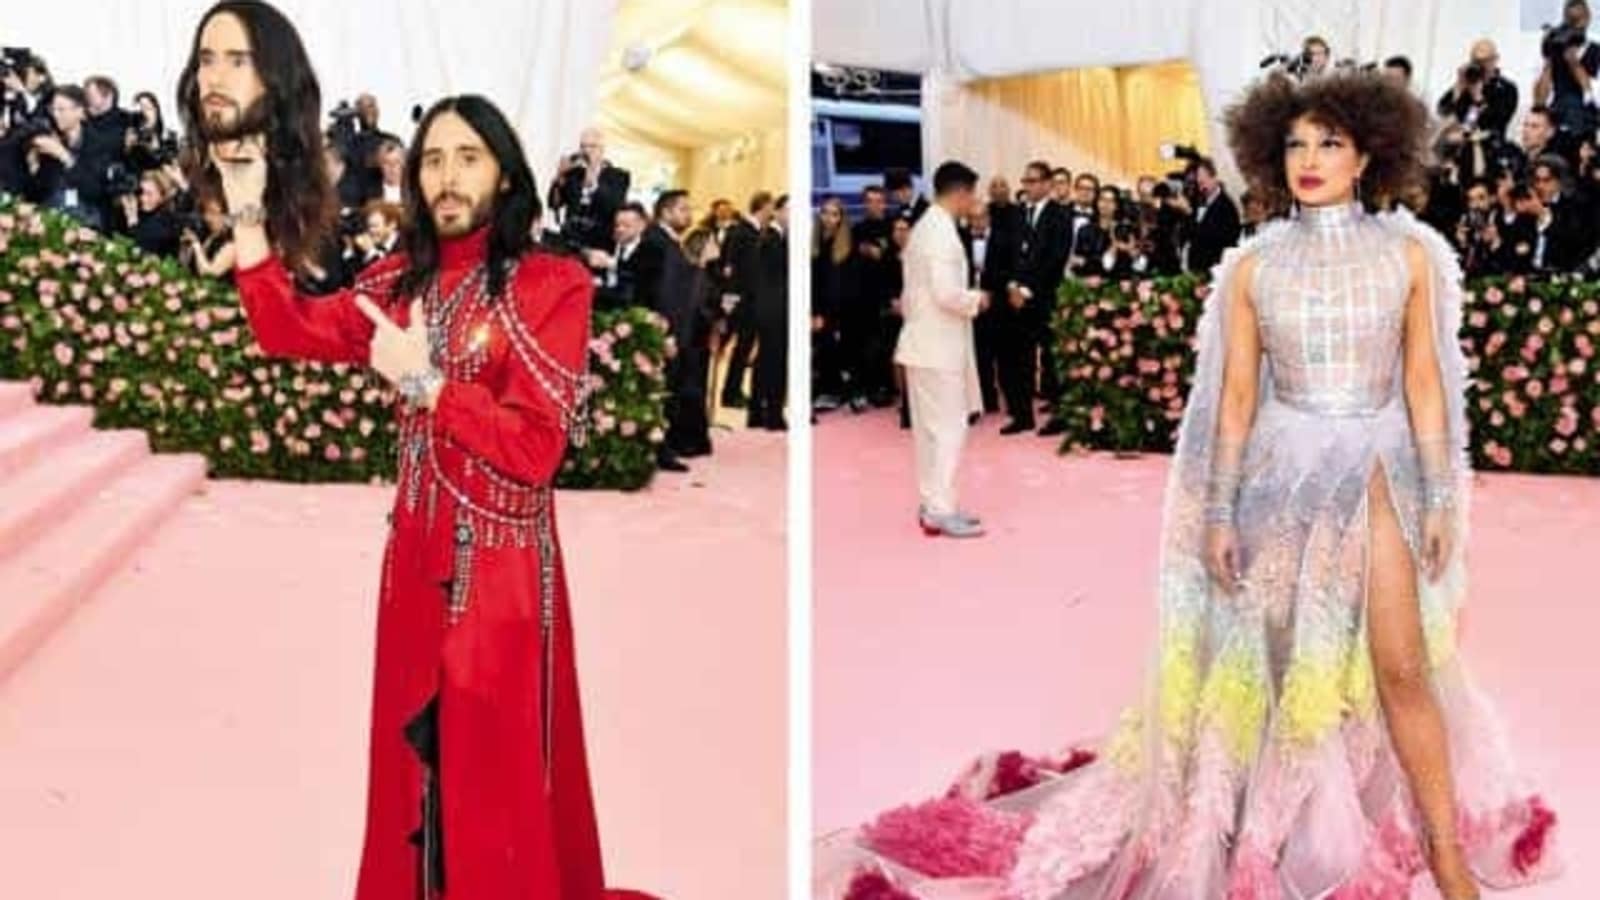 Sidelined last year, the Met Gala is returning — twice | Fashion Trends ...